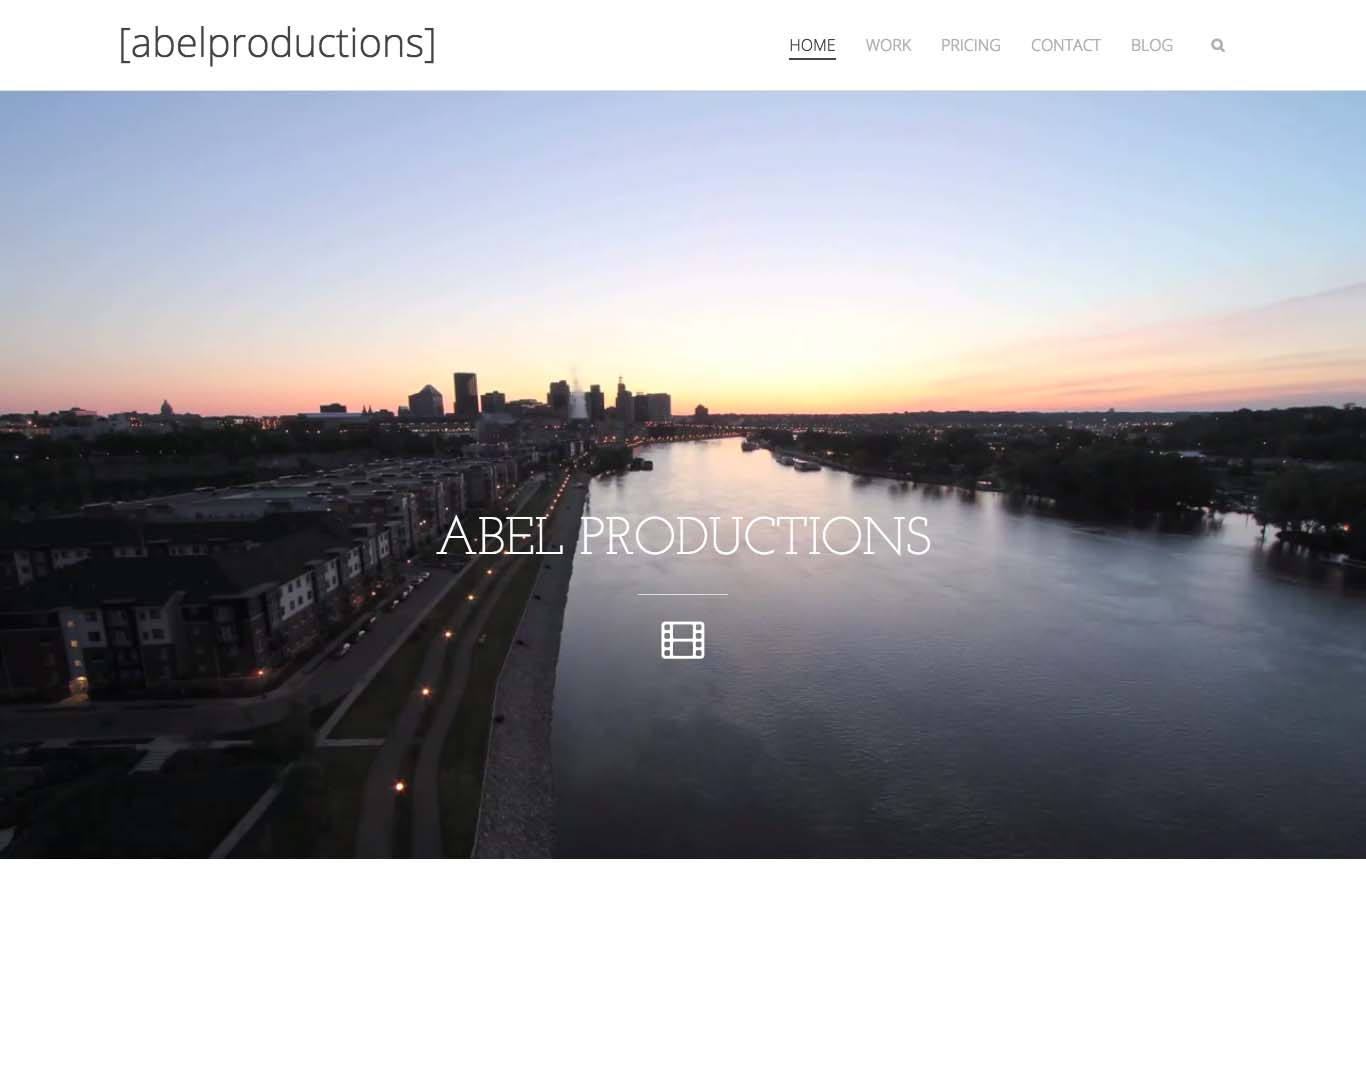 AbelProductions.com